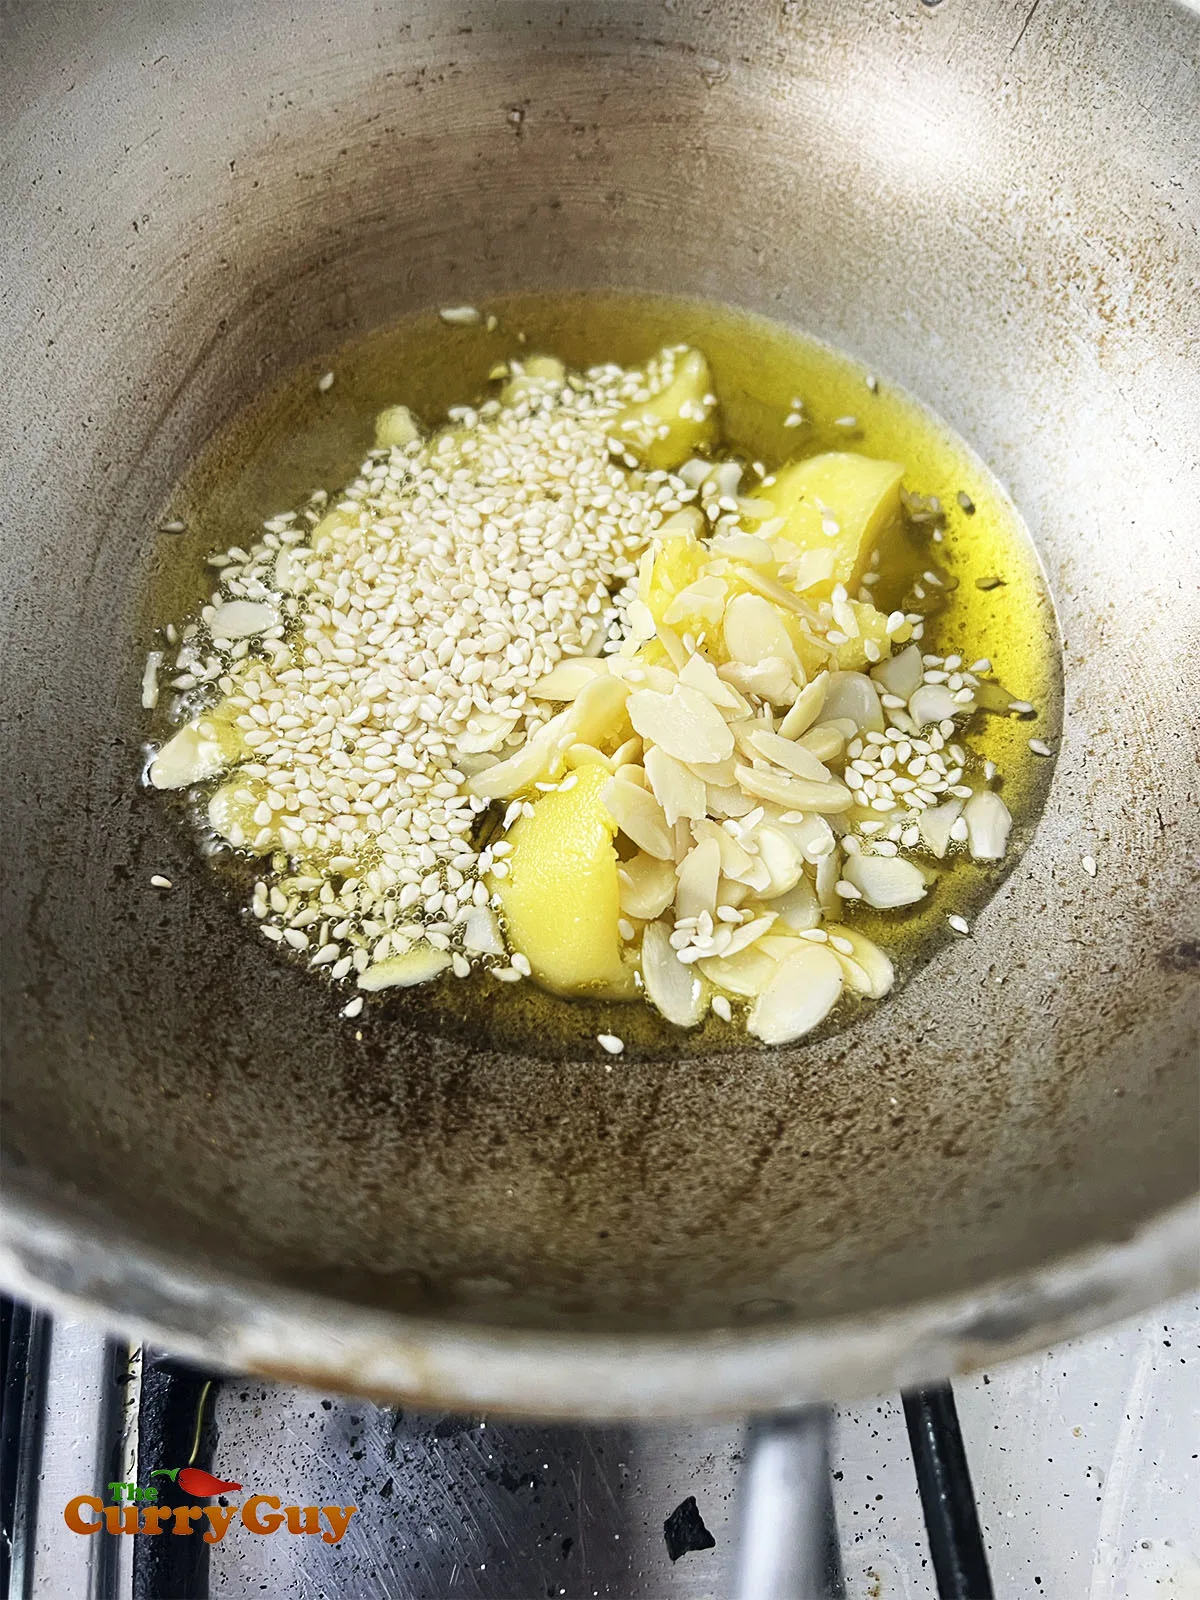 Toasting almond flakes and sesame seeds in hot ghee.